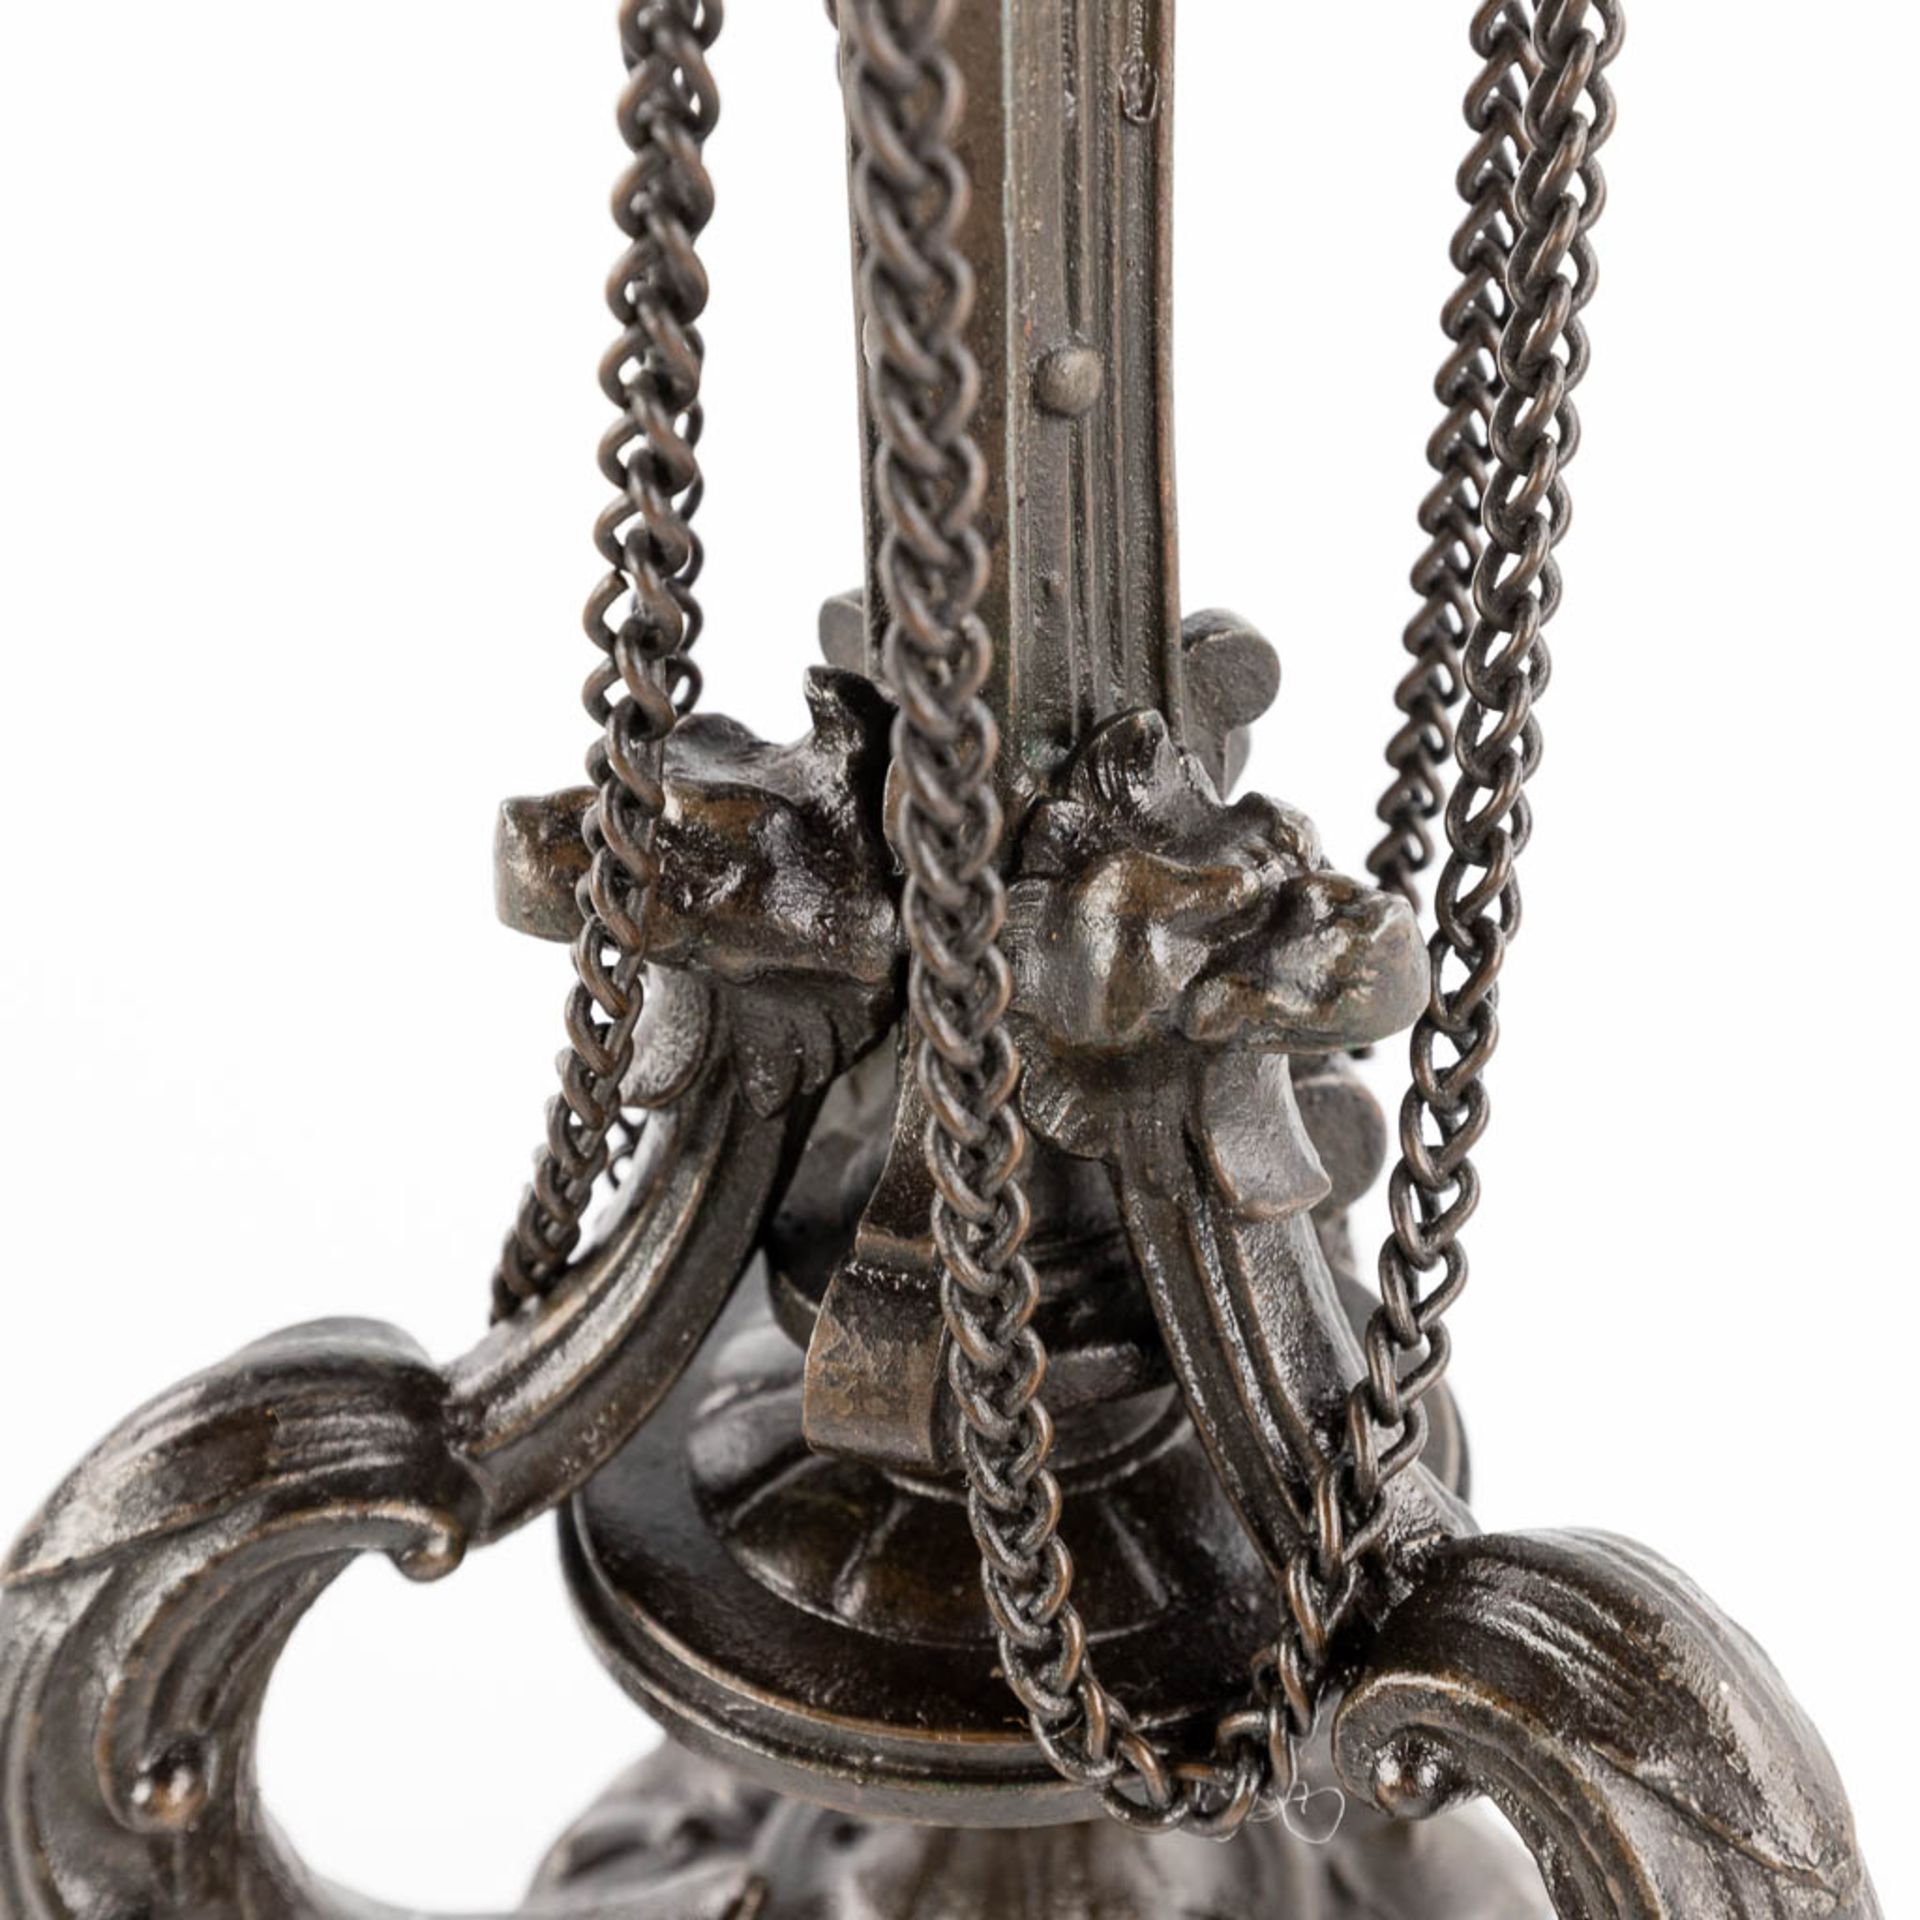 A pair of candelabra, bronze decorated with birds. 19th C. (H:56 x D:26 cm) - Image 8 of 12